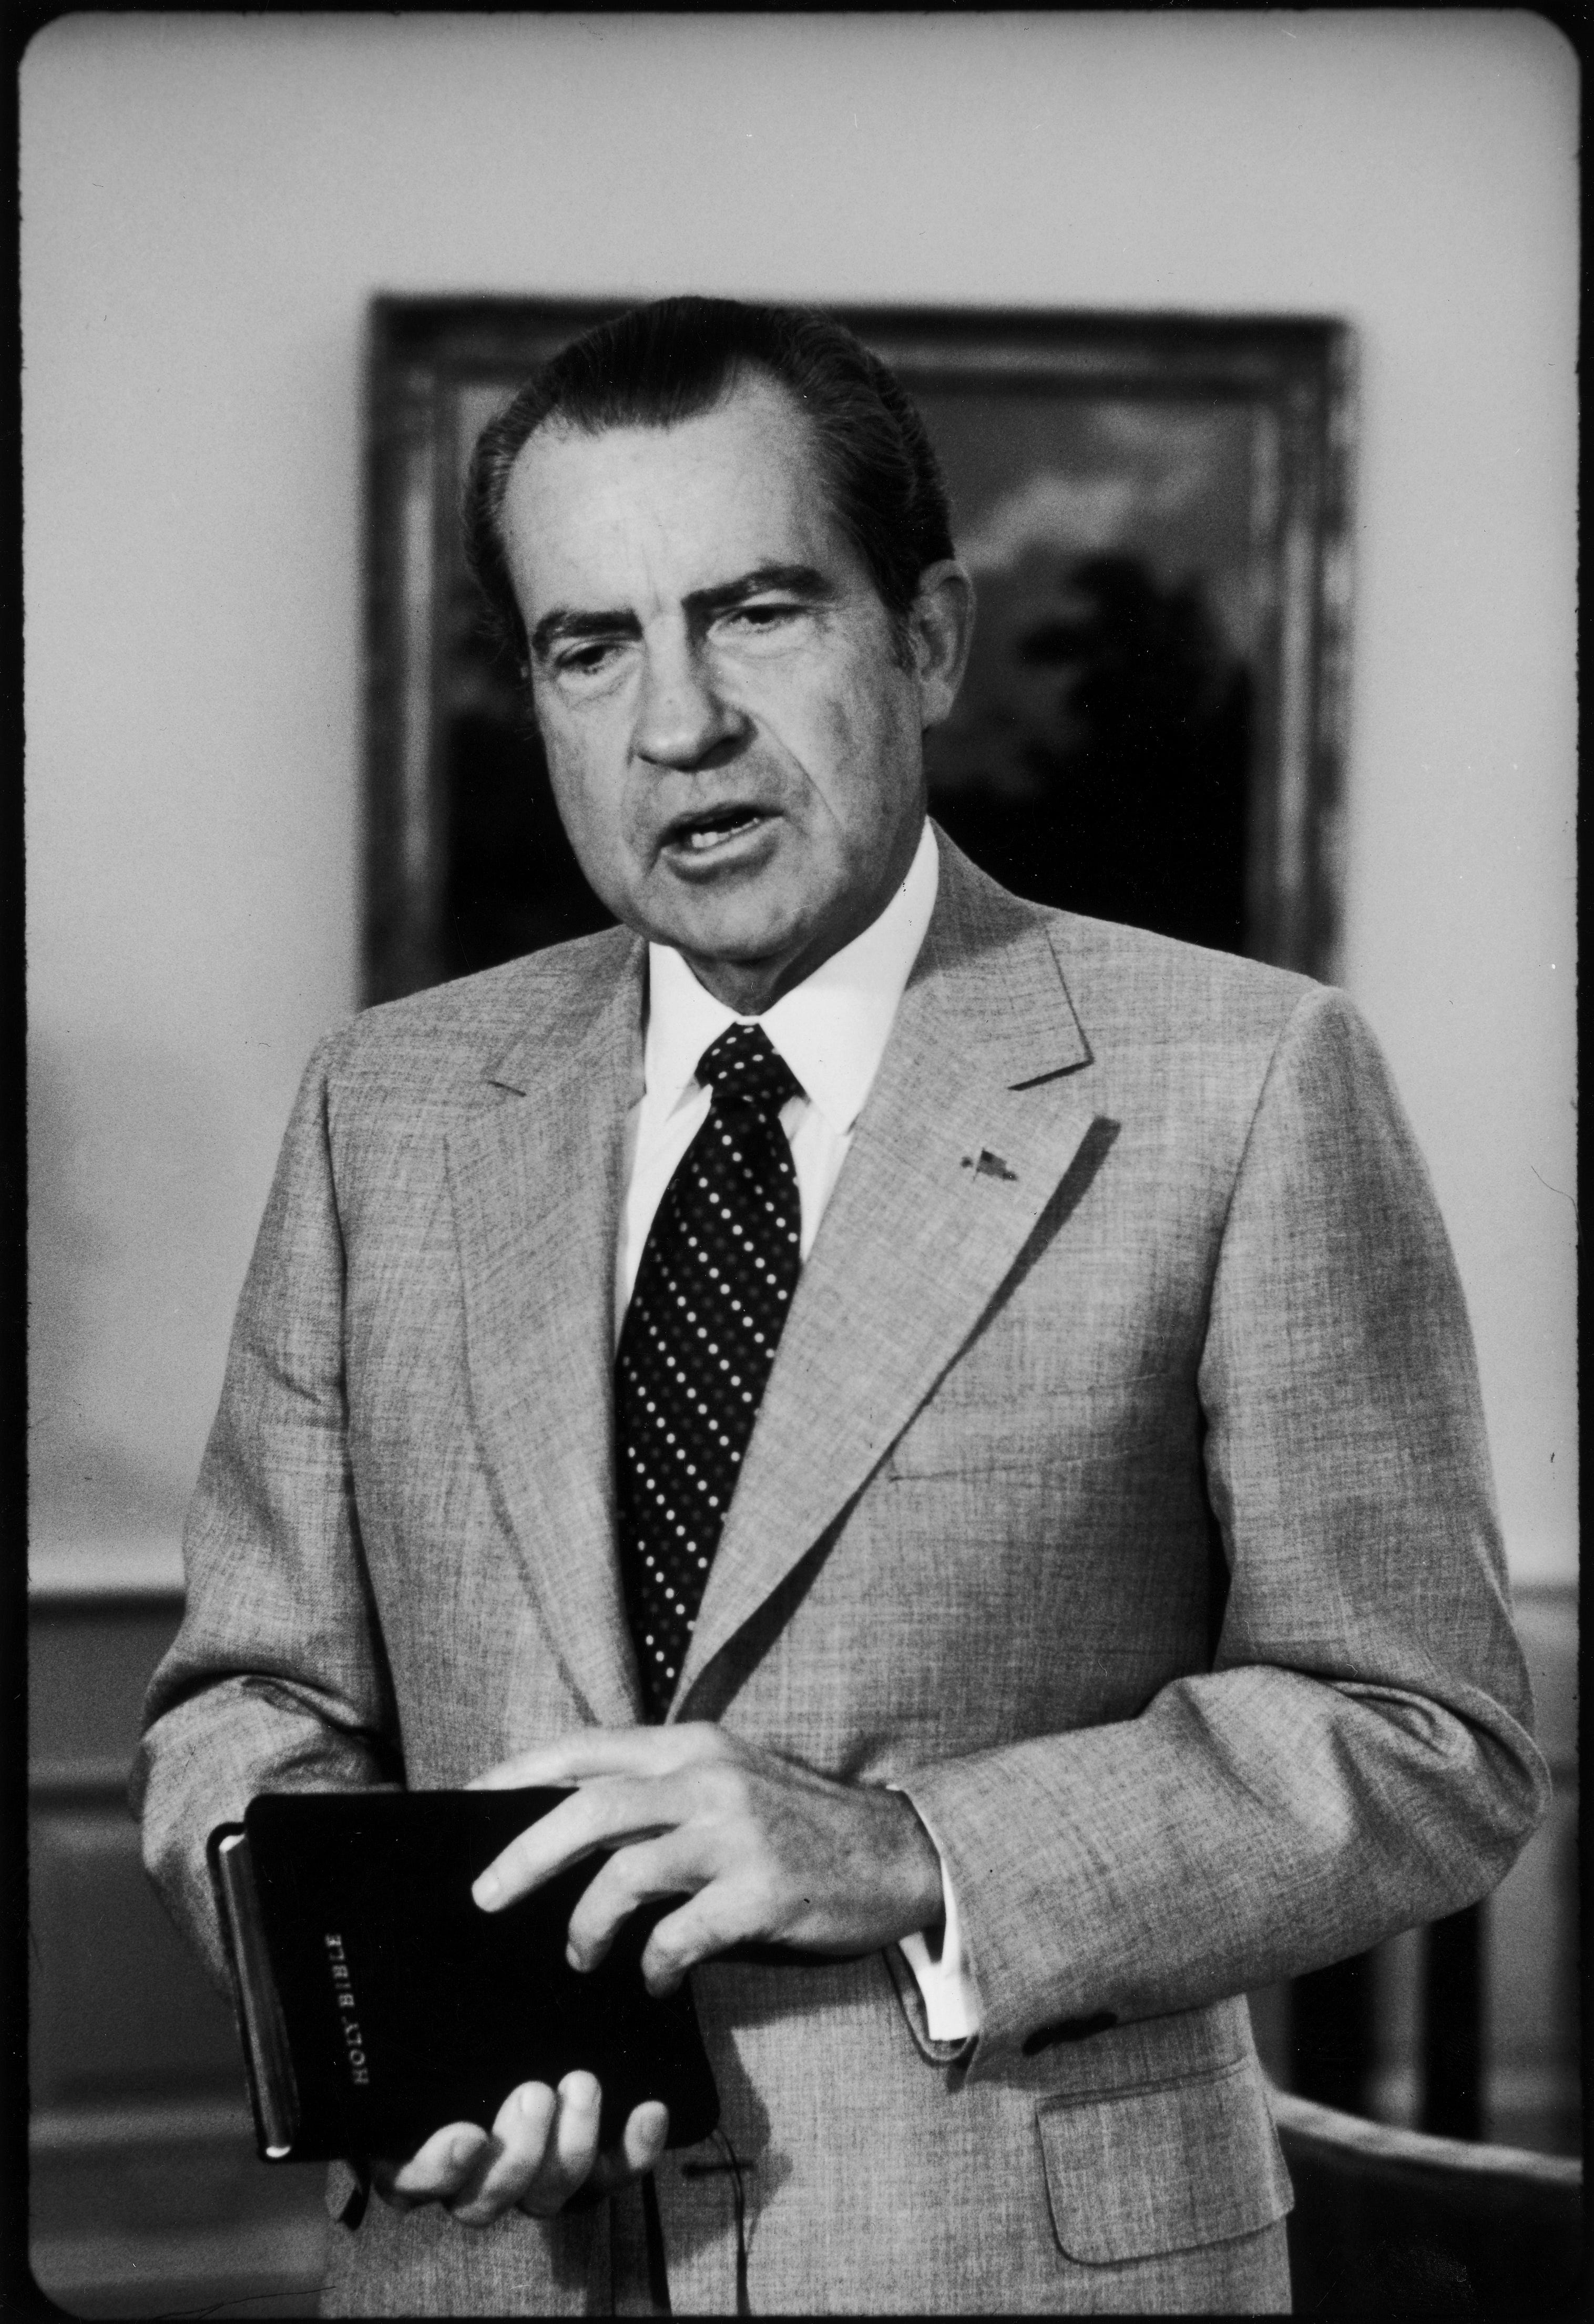 DISTRICT OF COLUMBIA, UNITED STATES - AUGUST 08: President Richard Nixon signed Title IX into law in 1972.